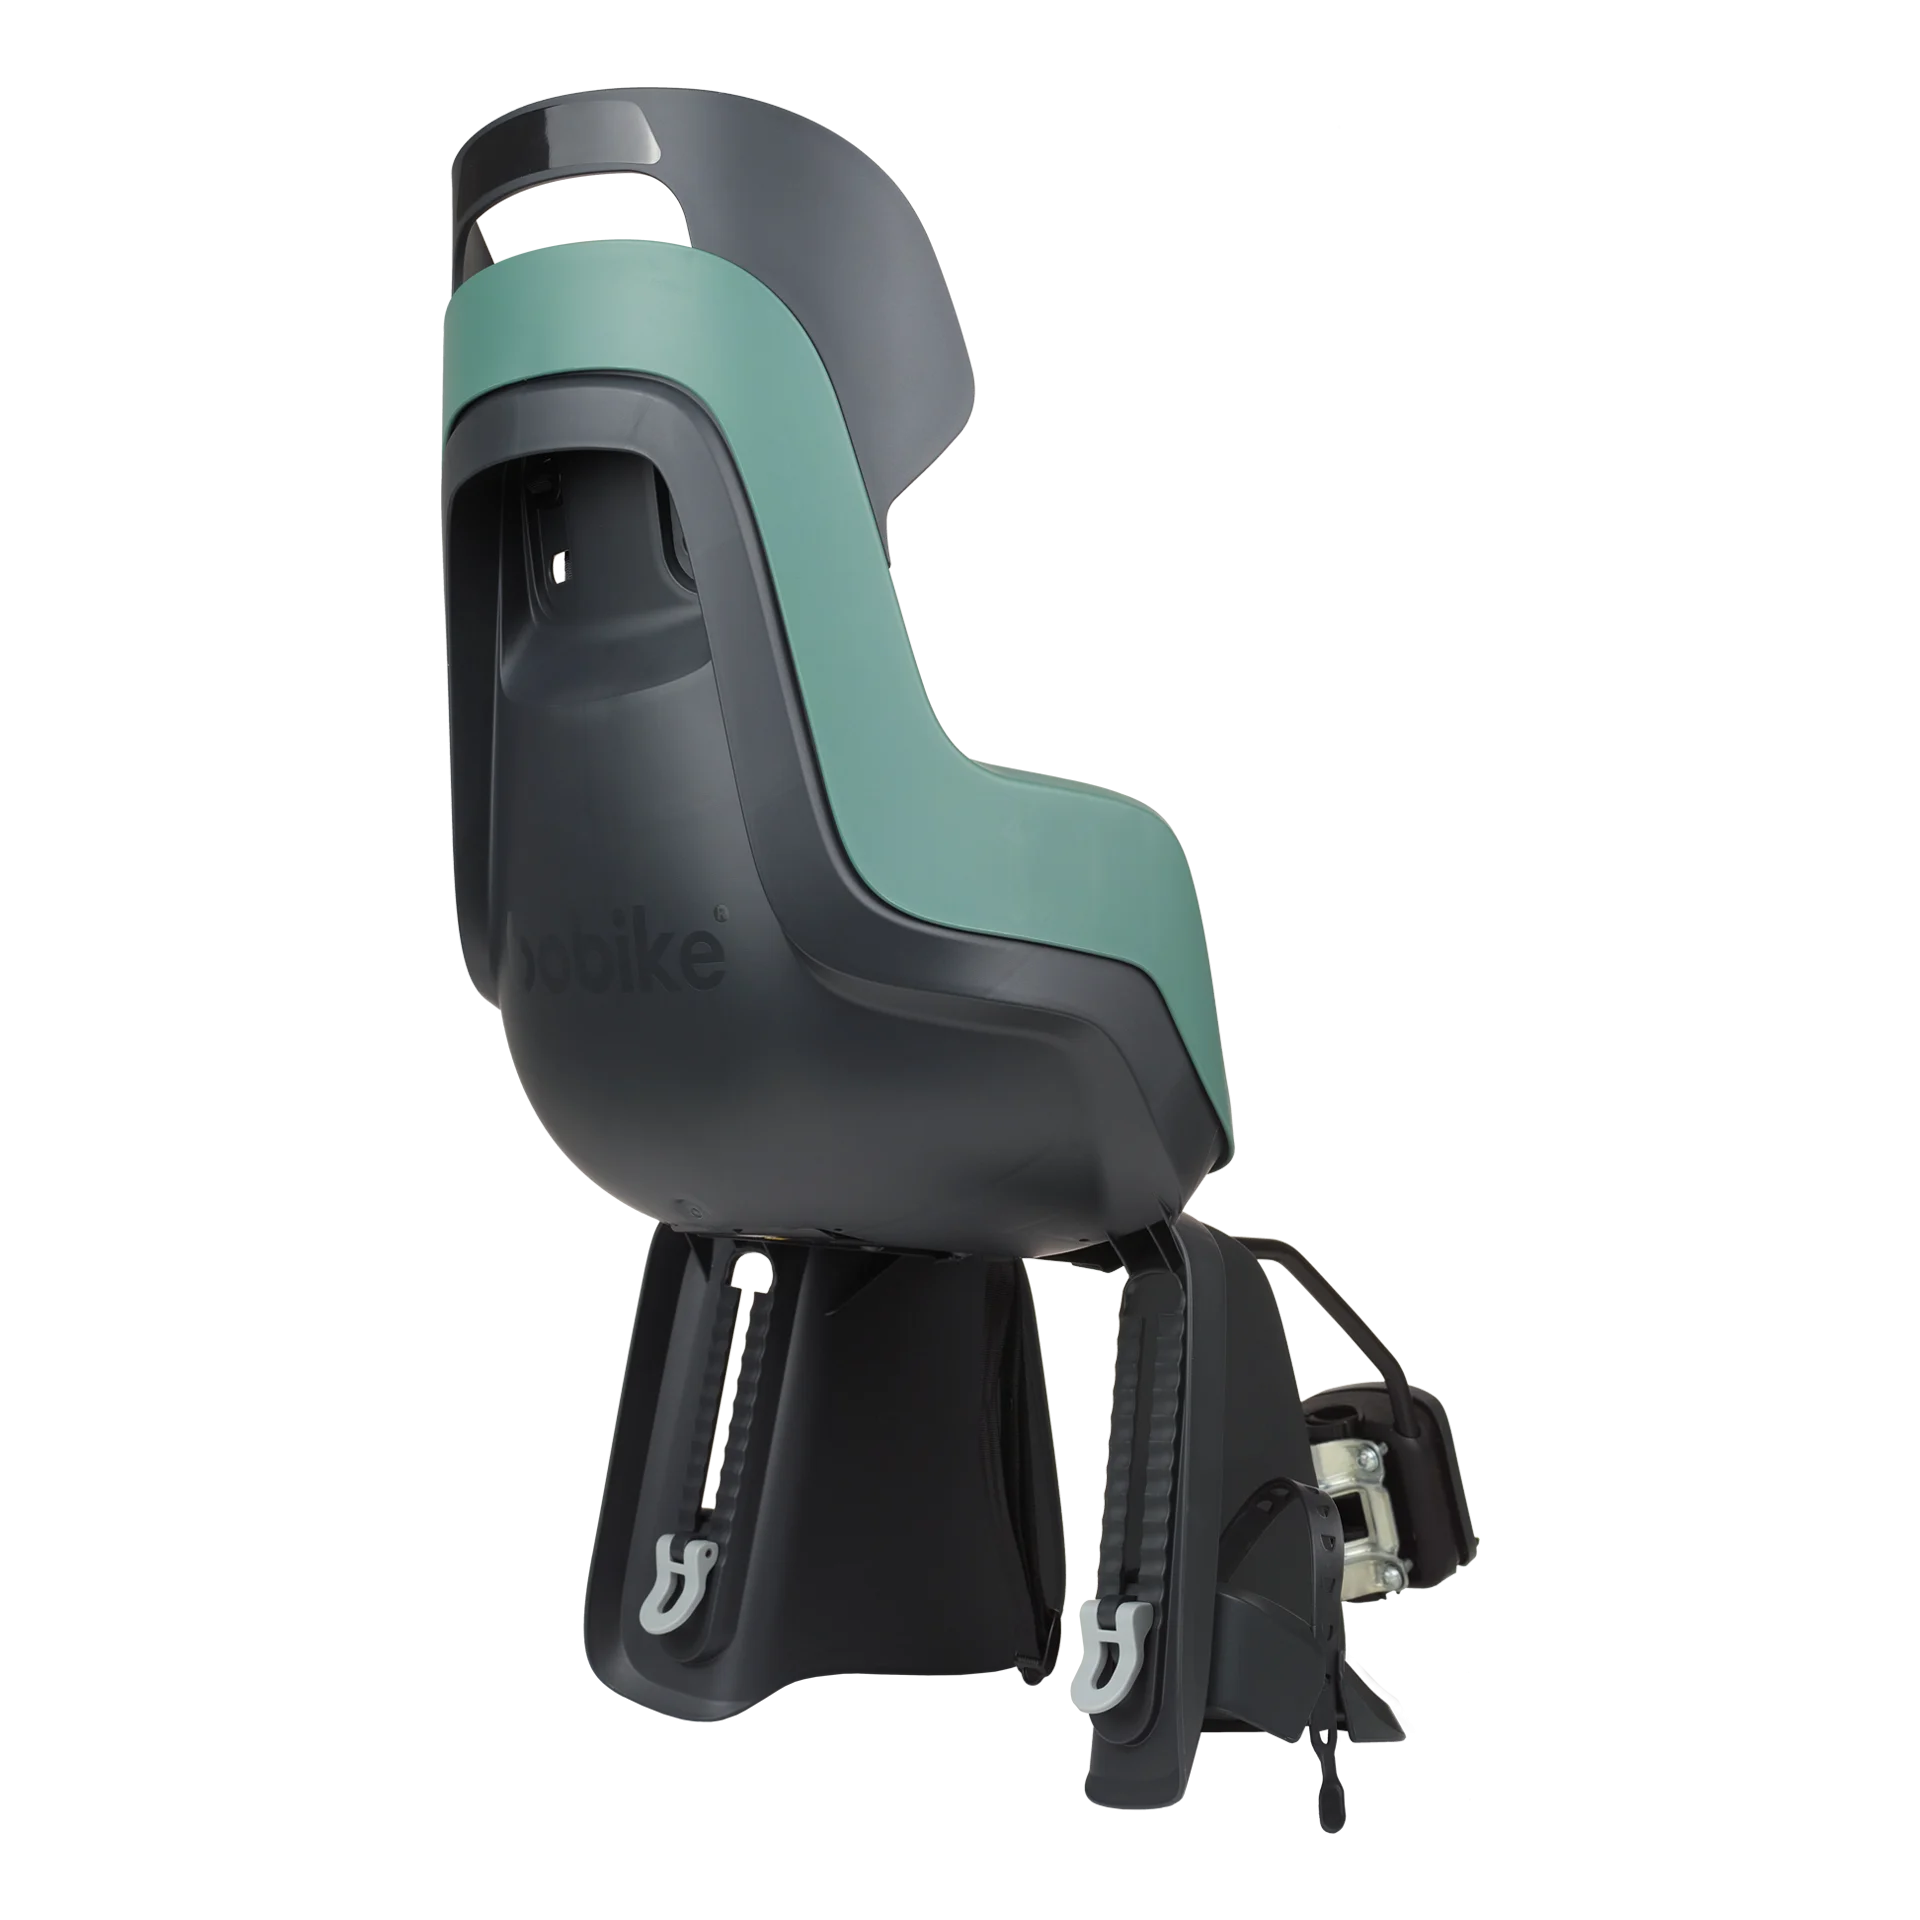 Rear bicycle safety seat for frame mount, with a safety-belt of 3-points and a soft cushion.